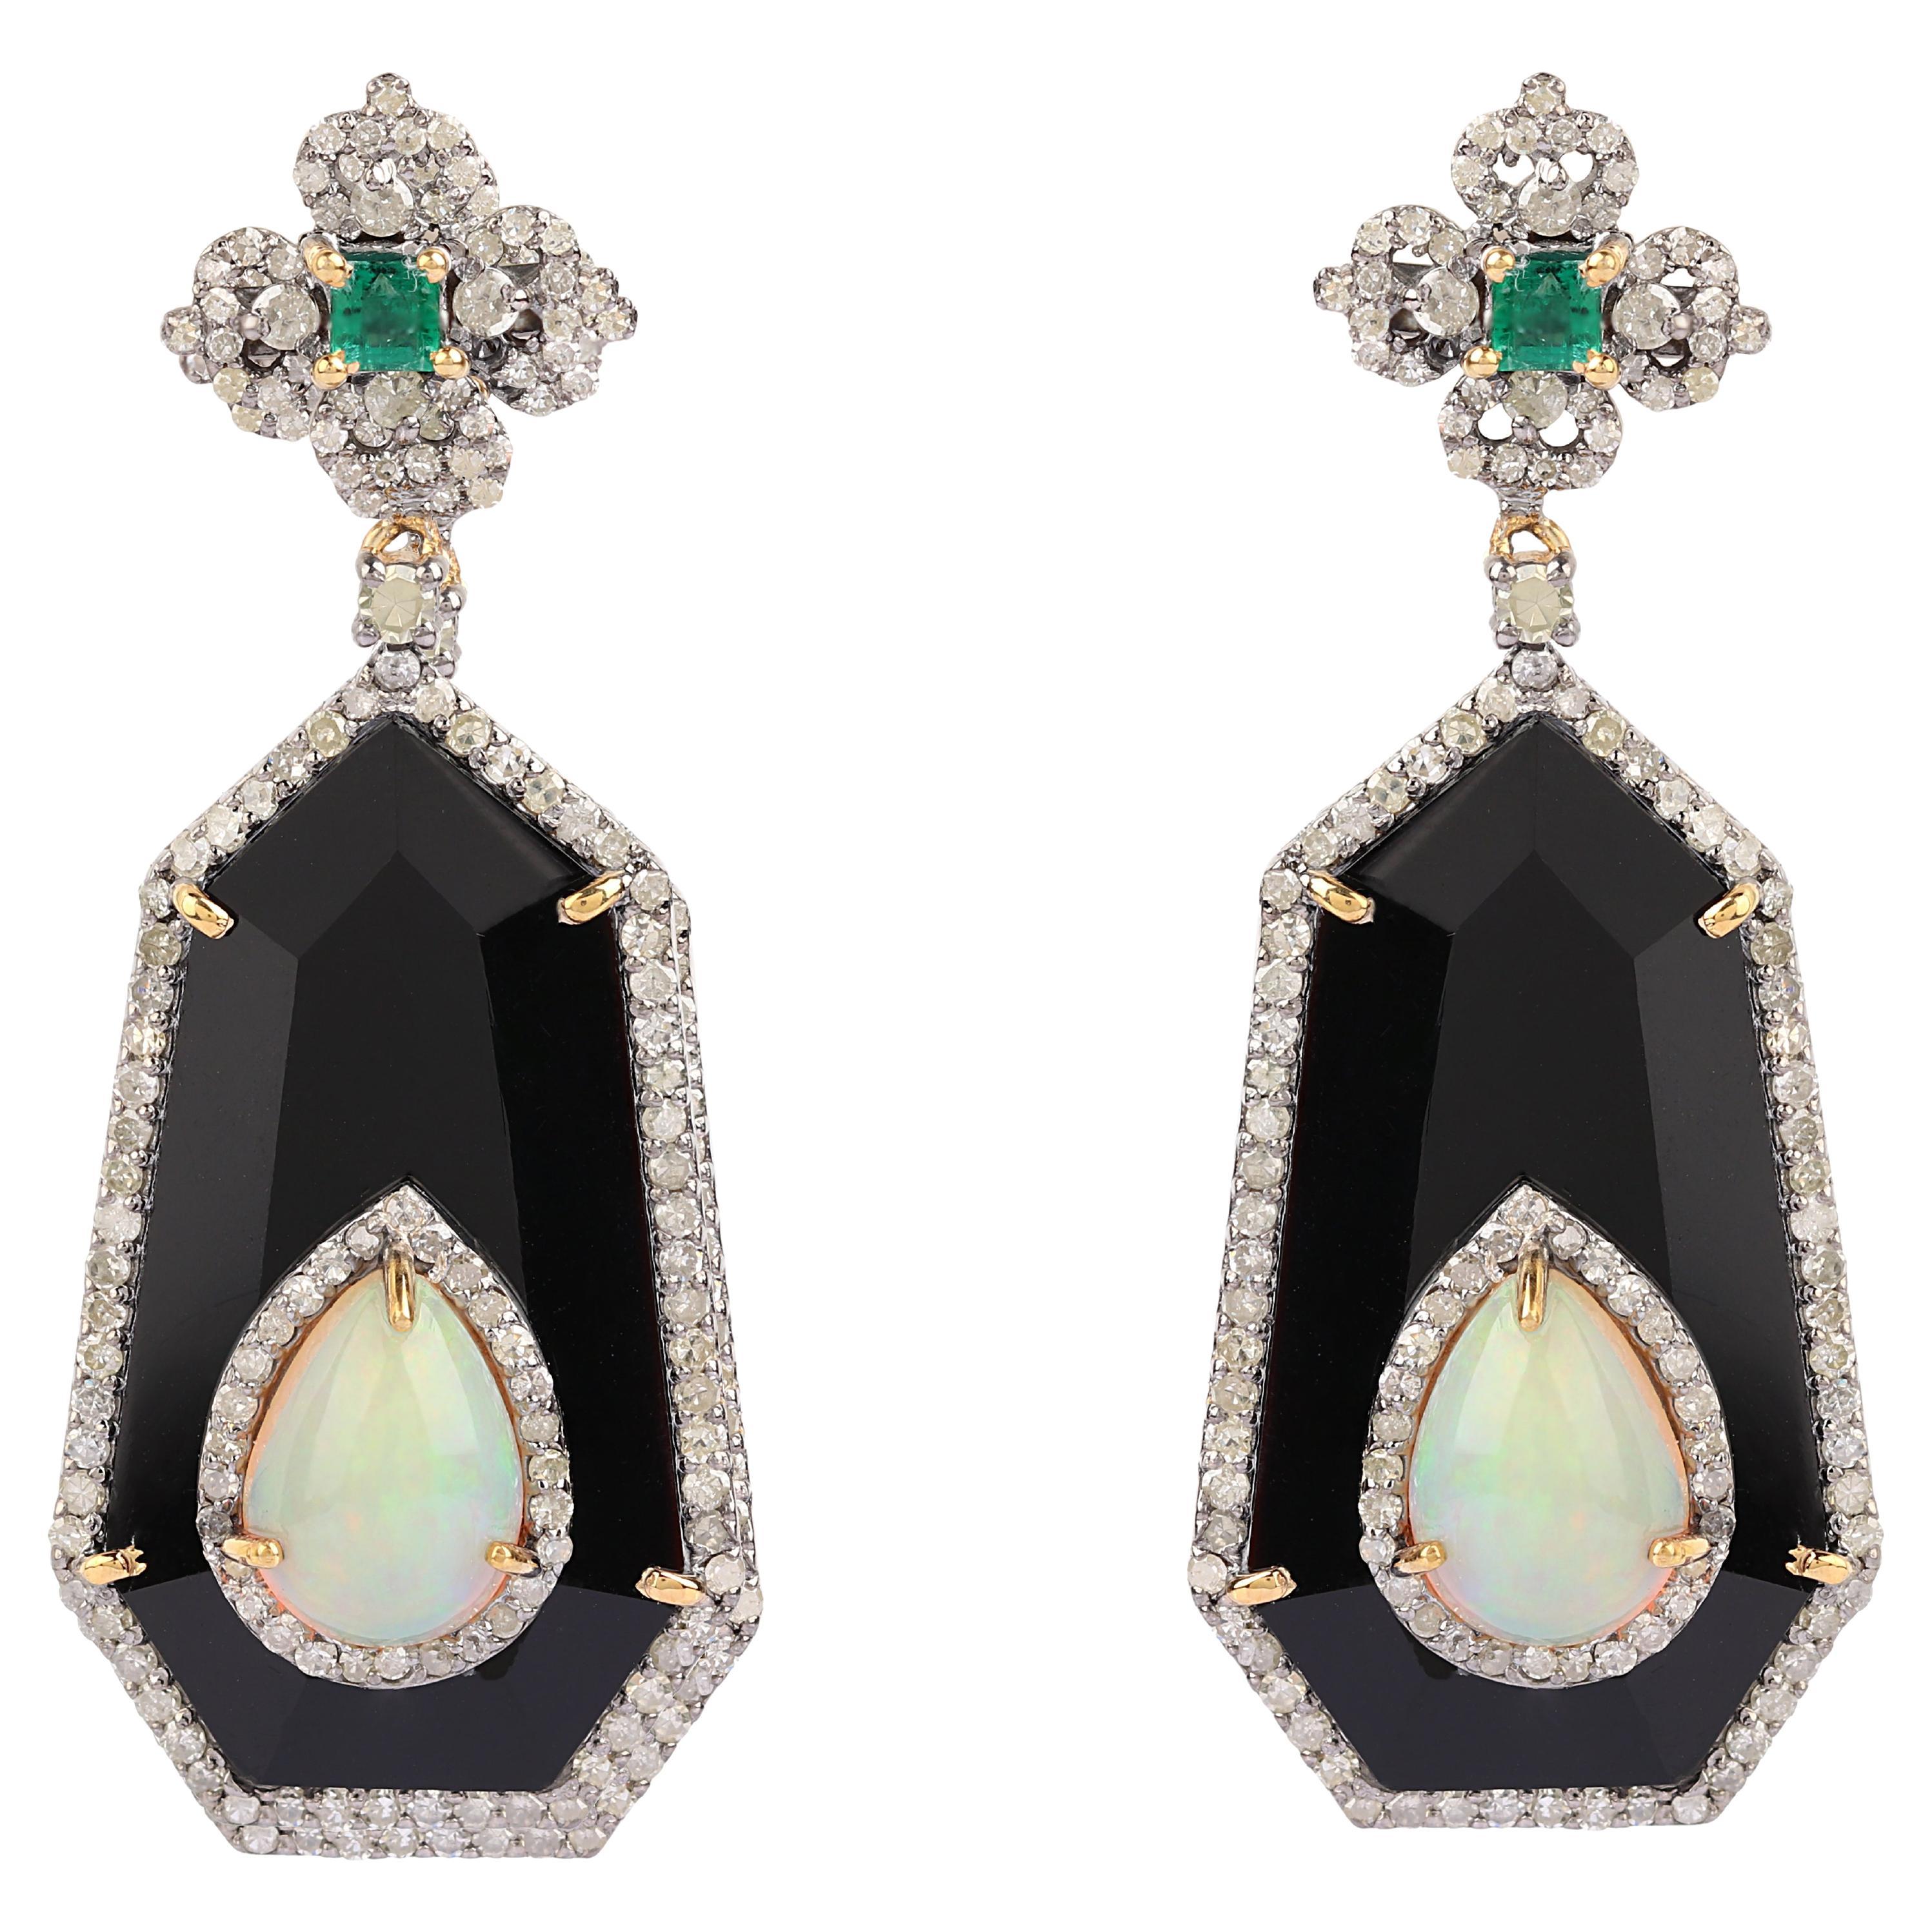 20.41 Carats Diamond, Emerald, Opal, and Onyx Drop Earrings in Art-Deco Style For Sale